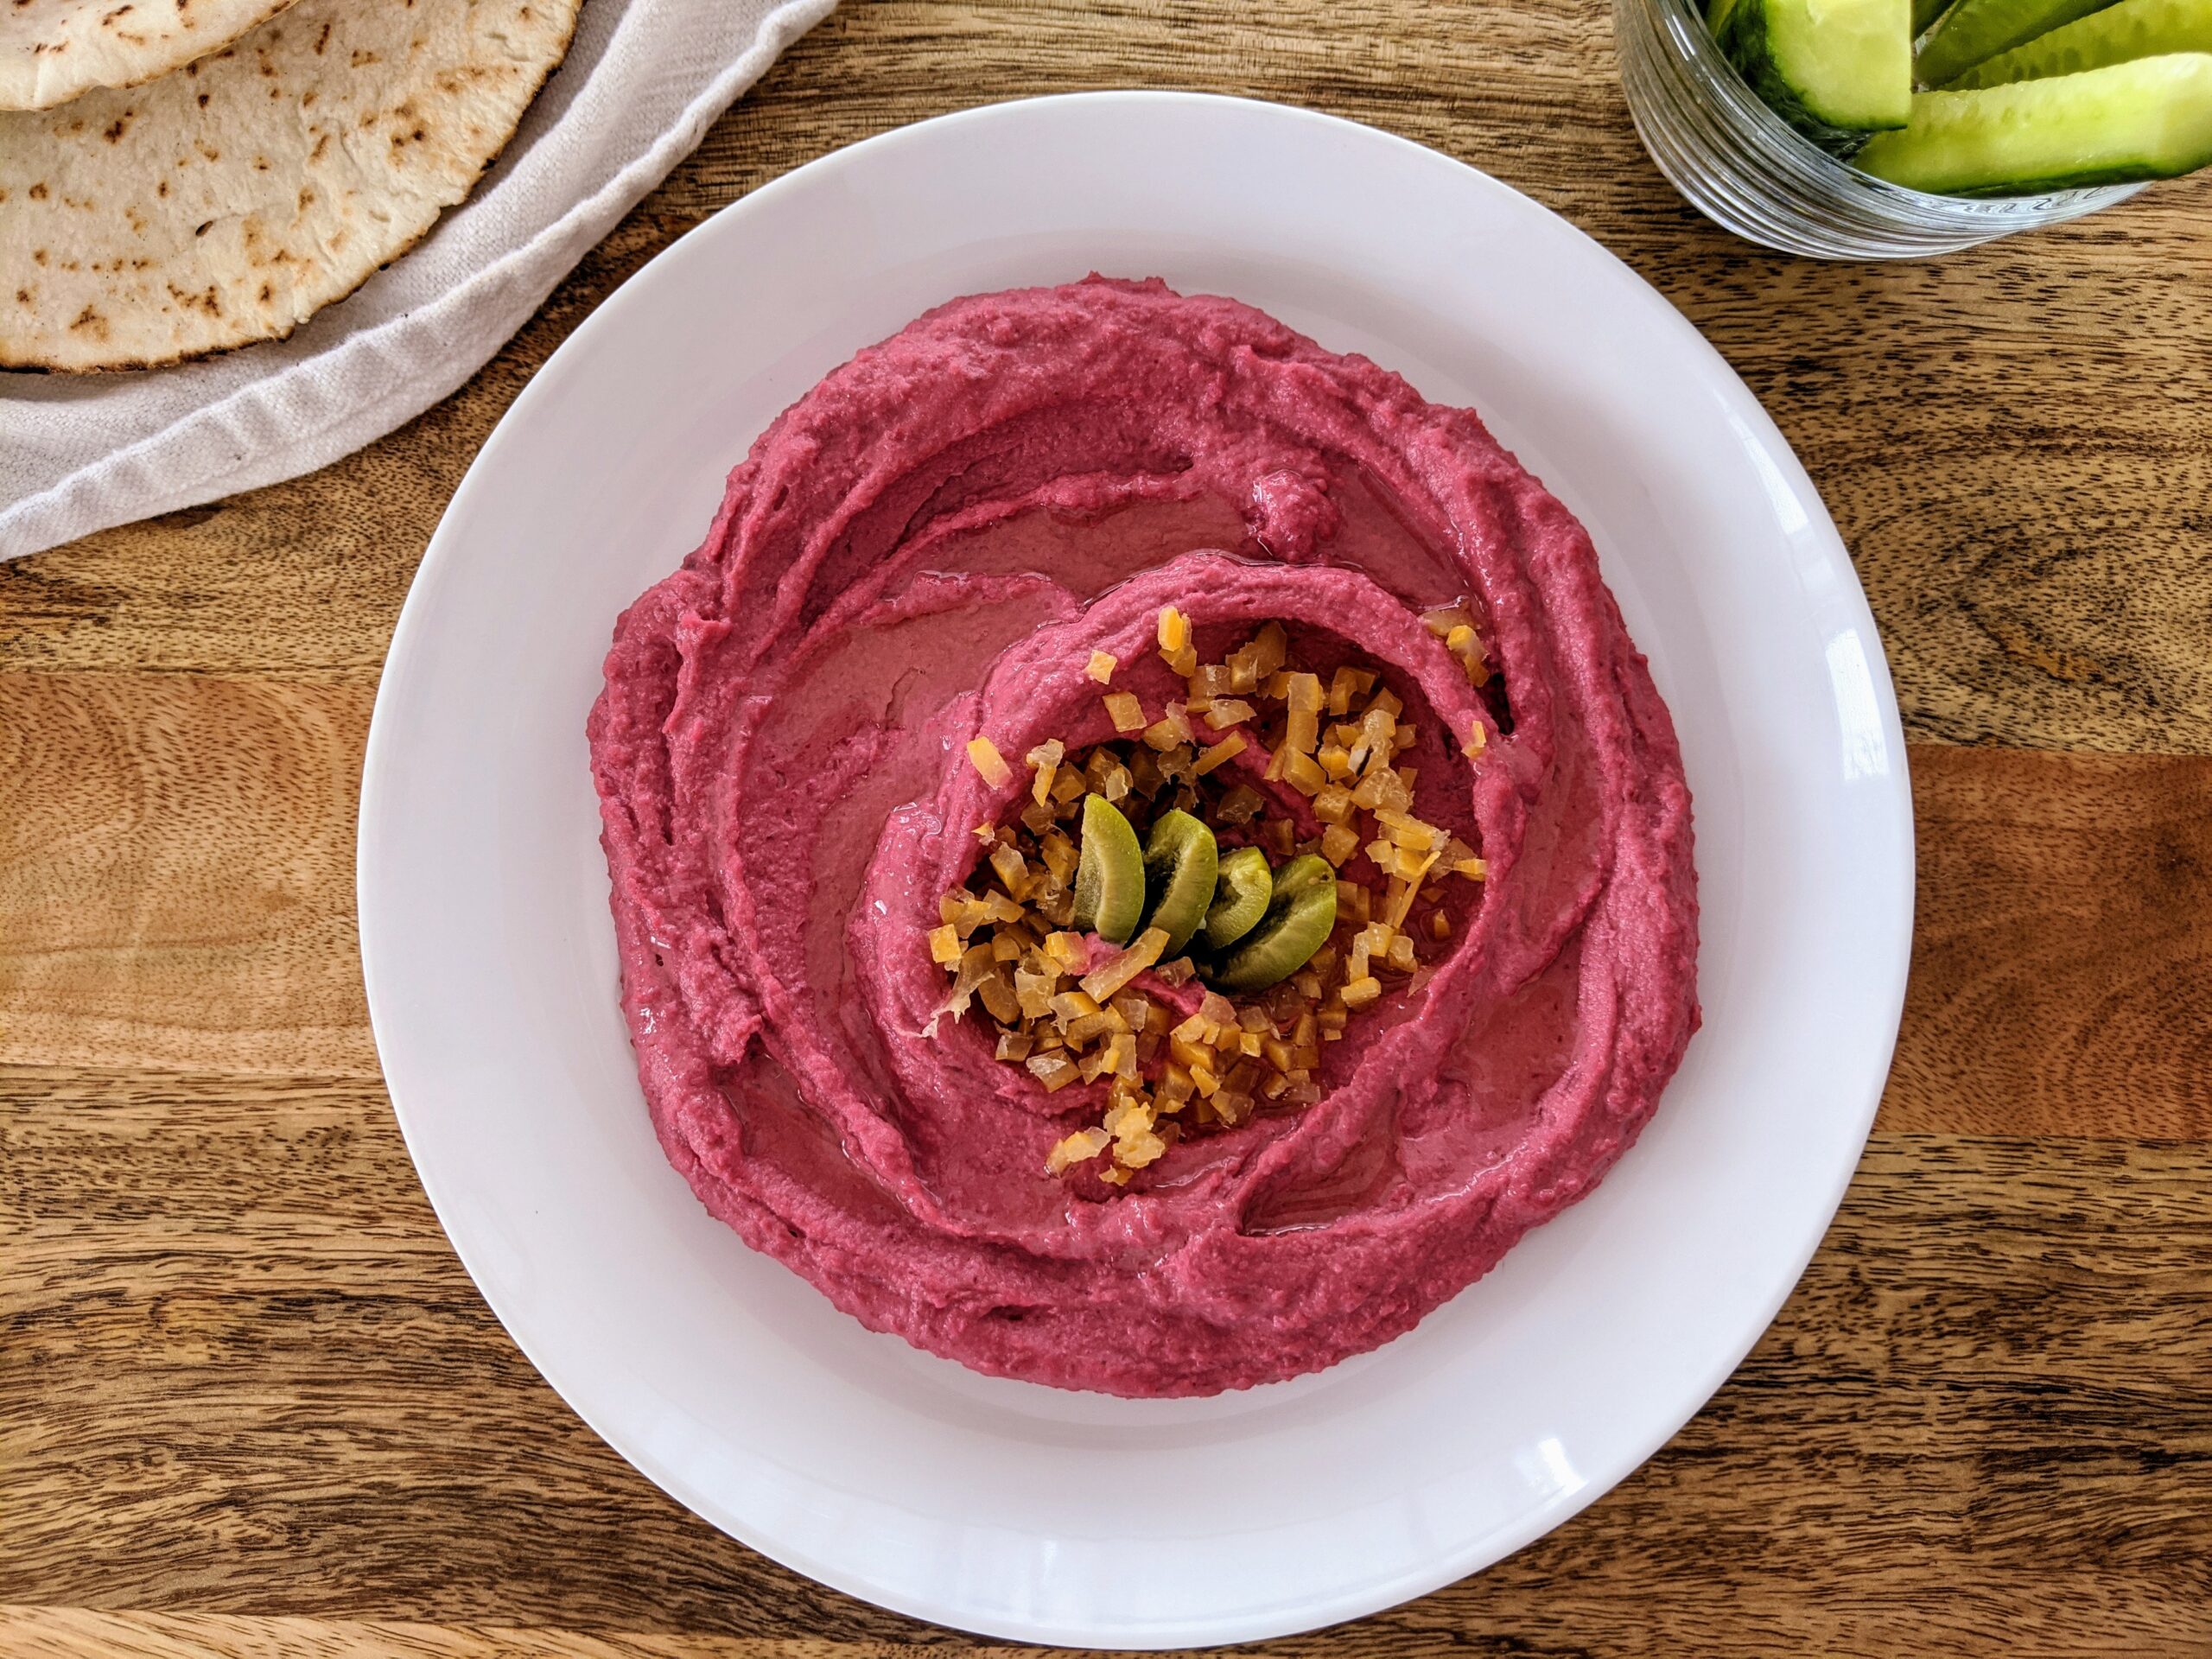 Vibrant pink beetroot hummus swooshed and swirled onto a white plate; garnished with chopped preserve lemon and sliced Castelvetrano olives. Served alongside warm pita bread and Persian cucumber spears.